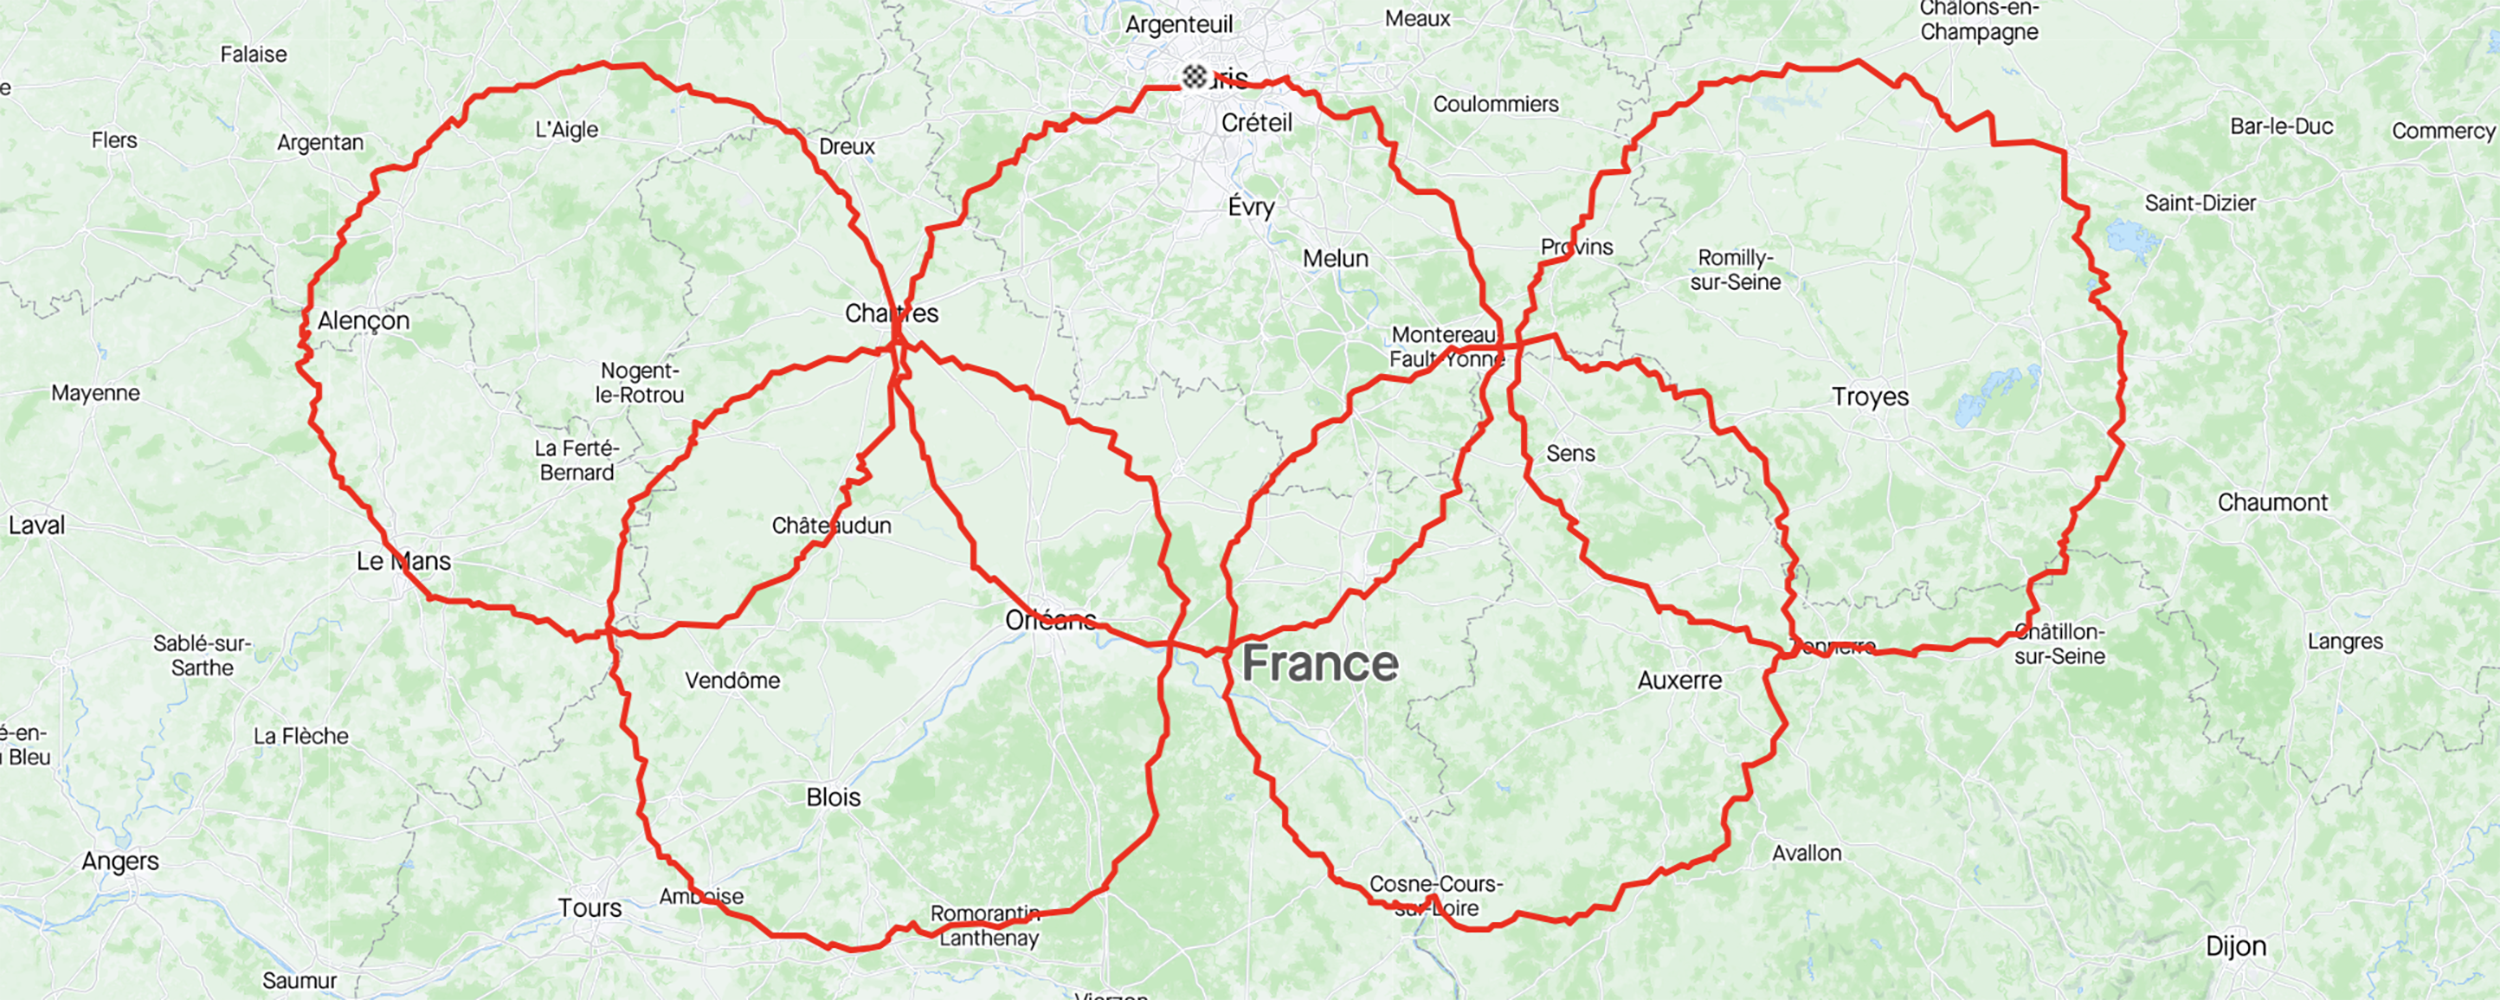 French Cyclists Claim World Record for Largest GPS Drawing by Bike